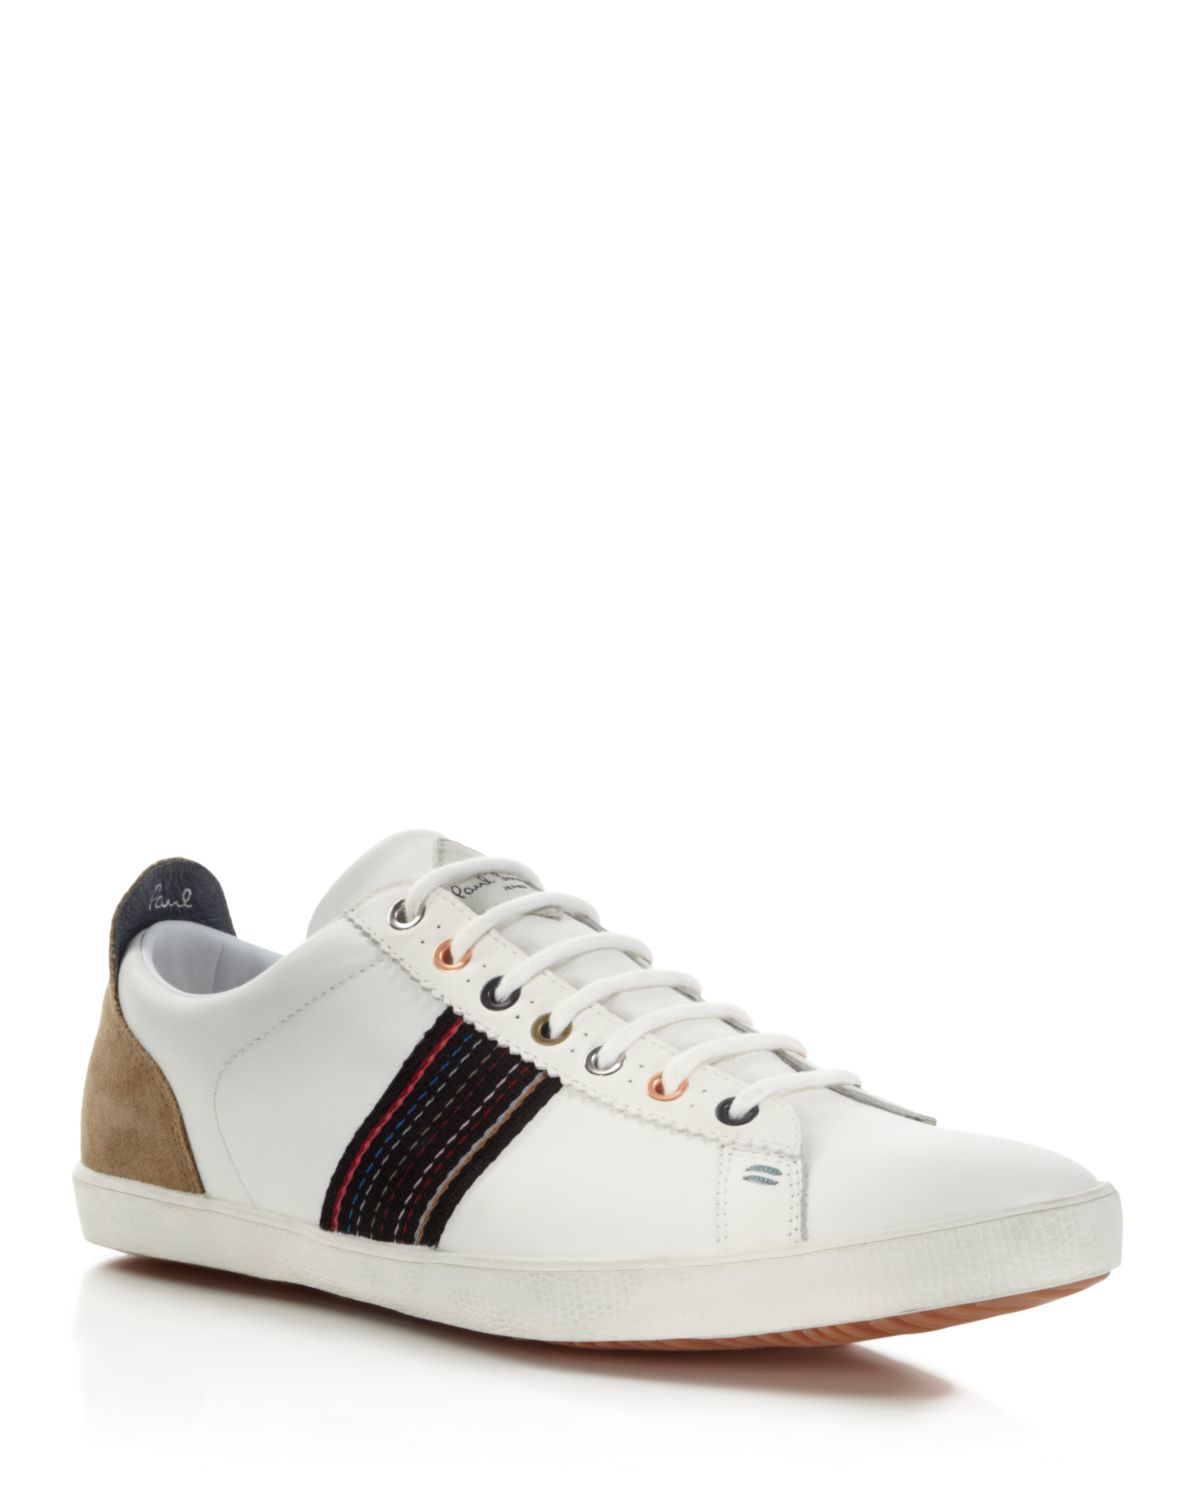 Paul Smith Osmo Mono Lux Leather Sneakers in White for Men - Lyst